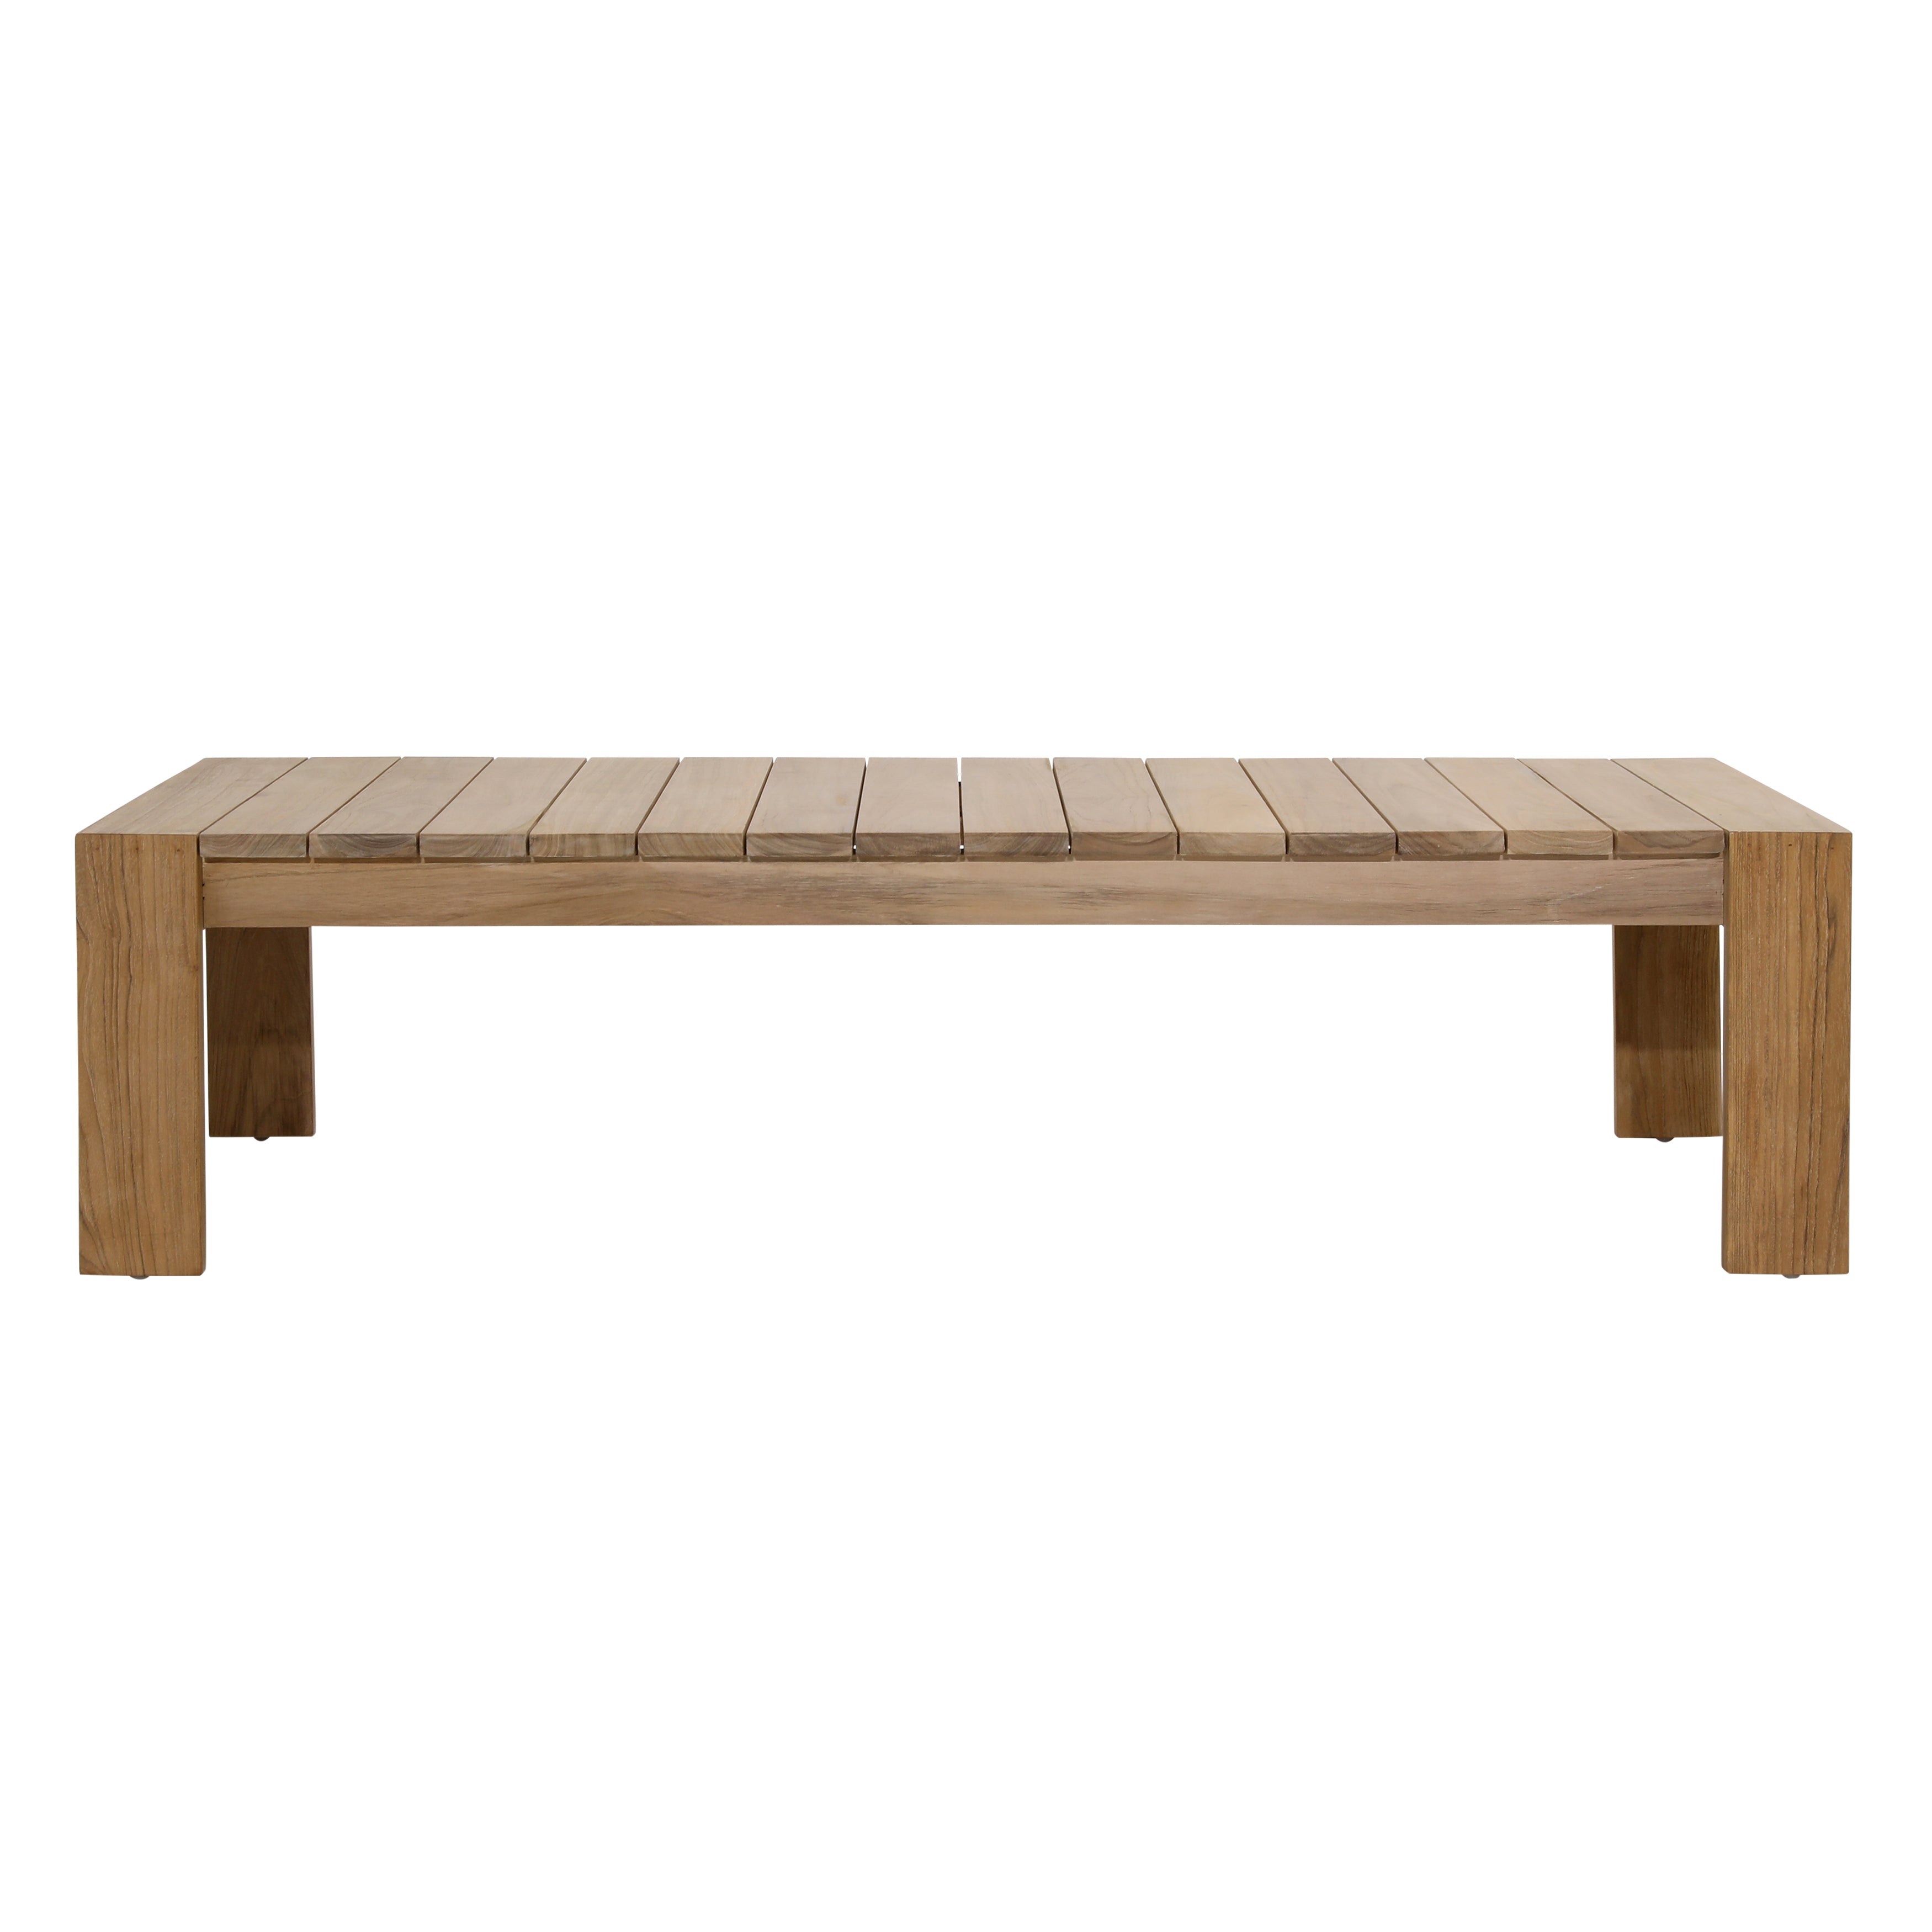 Zahara Outdoor Coffee Table - What A Room